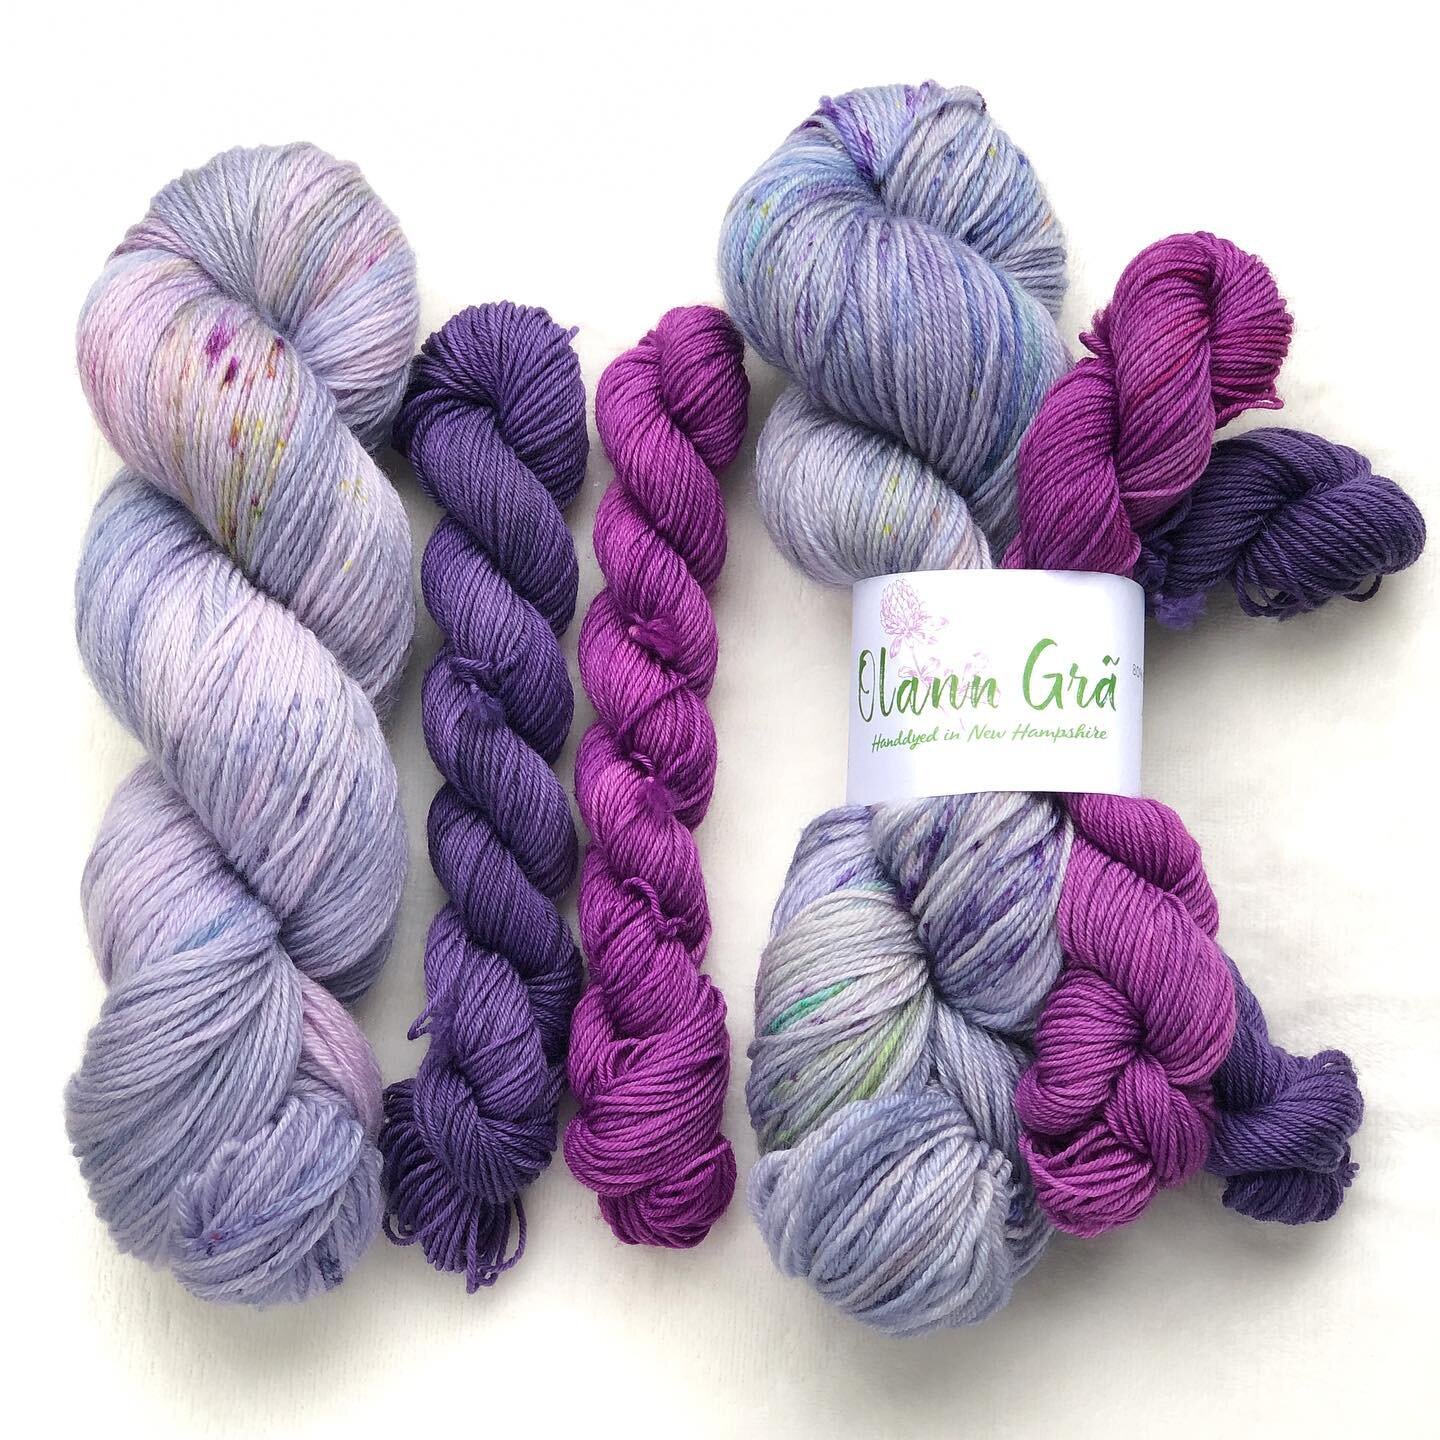 I had a couple extra mini skeins hanging around so I decided to listed 2 sets of All the Lilacs with two mini skeins (Violet &amp; Thistle), in the shop this morning. There are only 2 sets available. I have more of the main color, but not the minis.